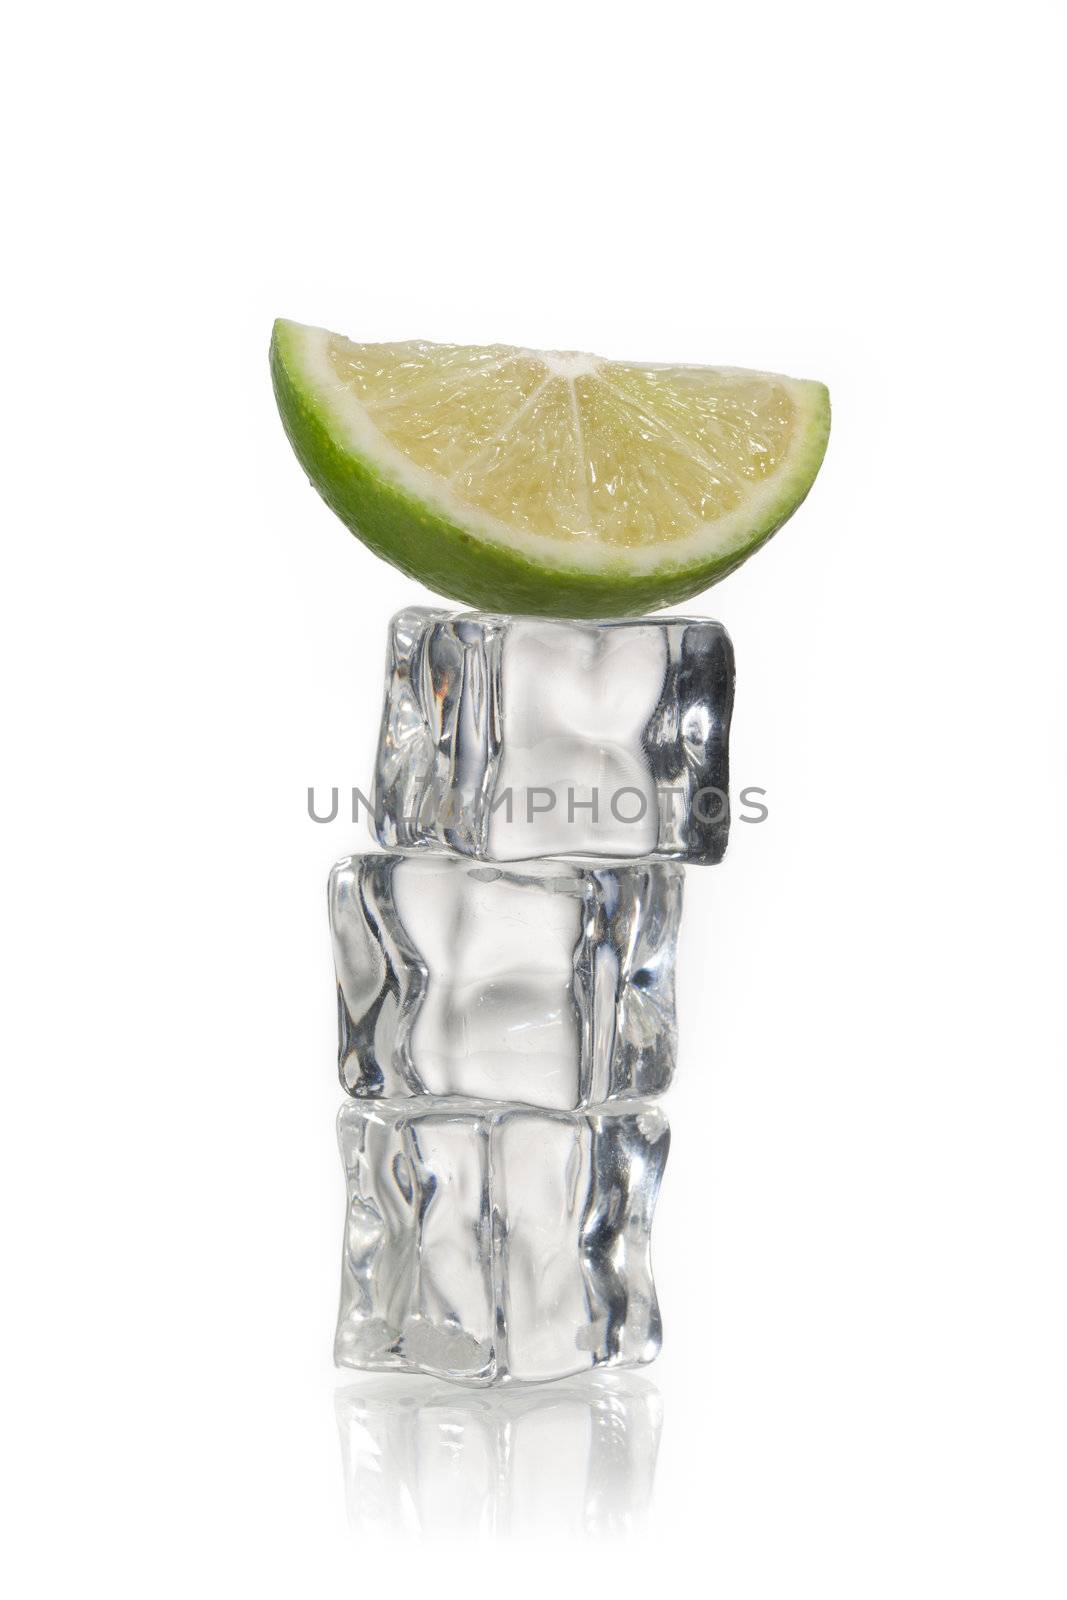 ice cubes with lemon on top on a white background